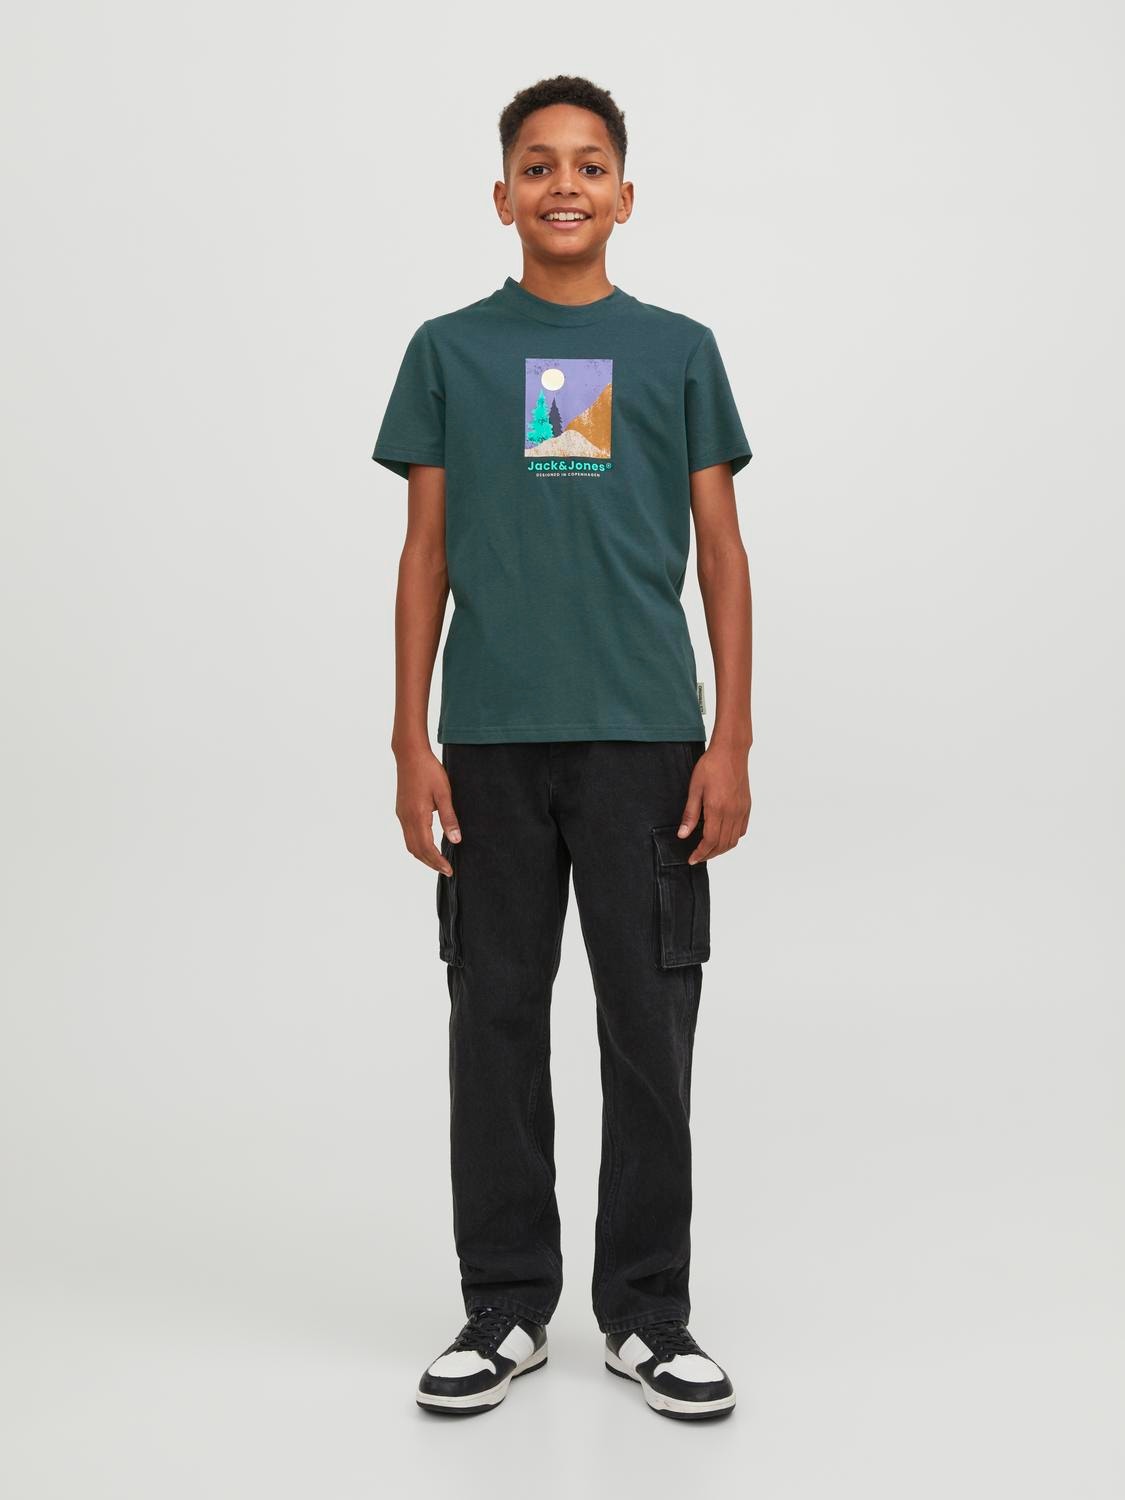 Jack & Jones Printed T-shirt For boys -Magical Forest - 12242872